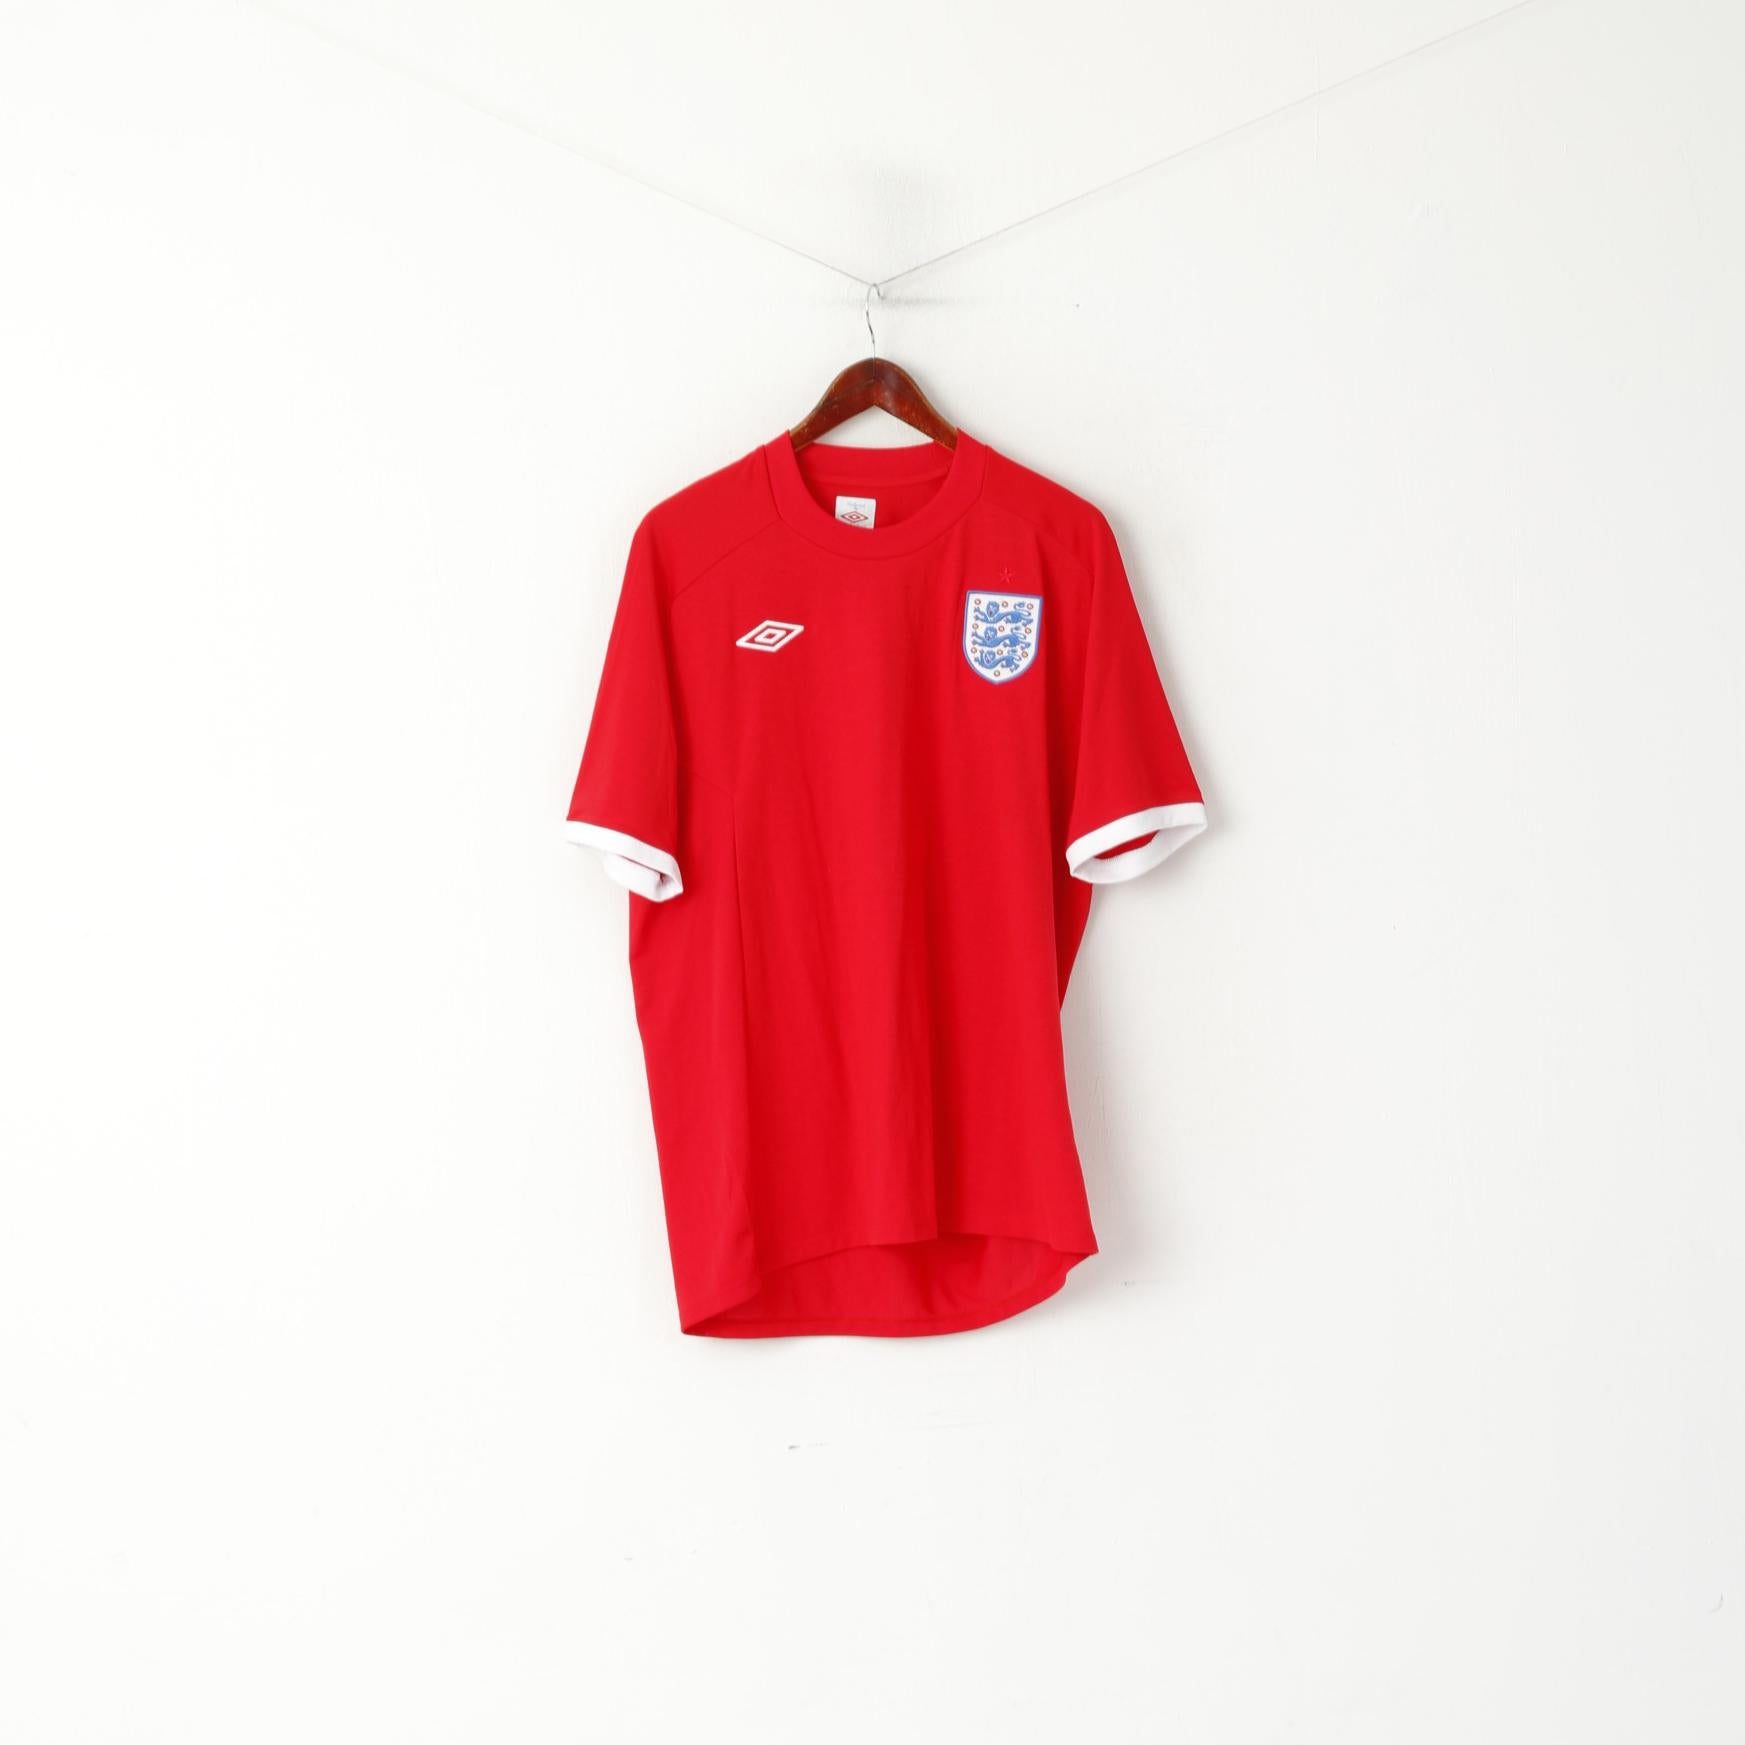 Umbro - Jersey All Over Print Jersey - Spain, Hombre, High Risk Red, L